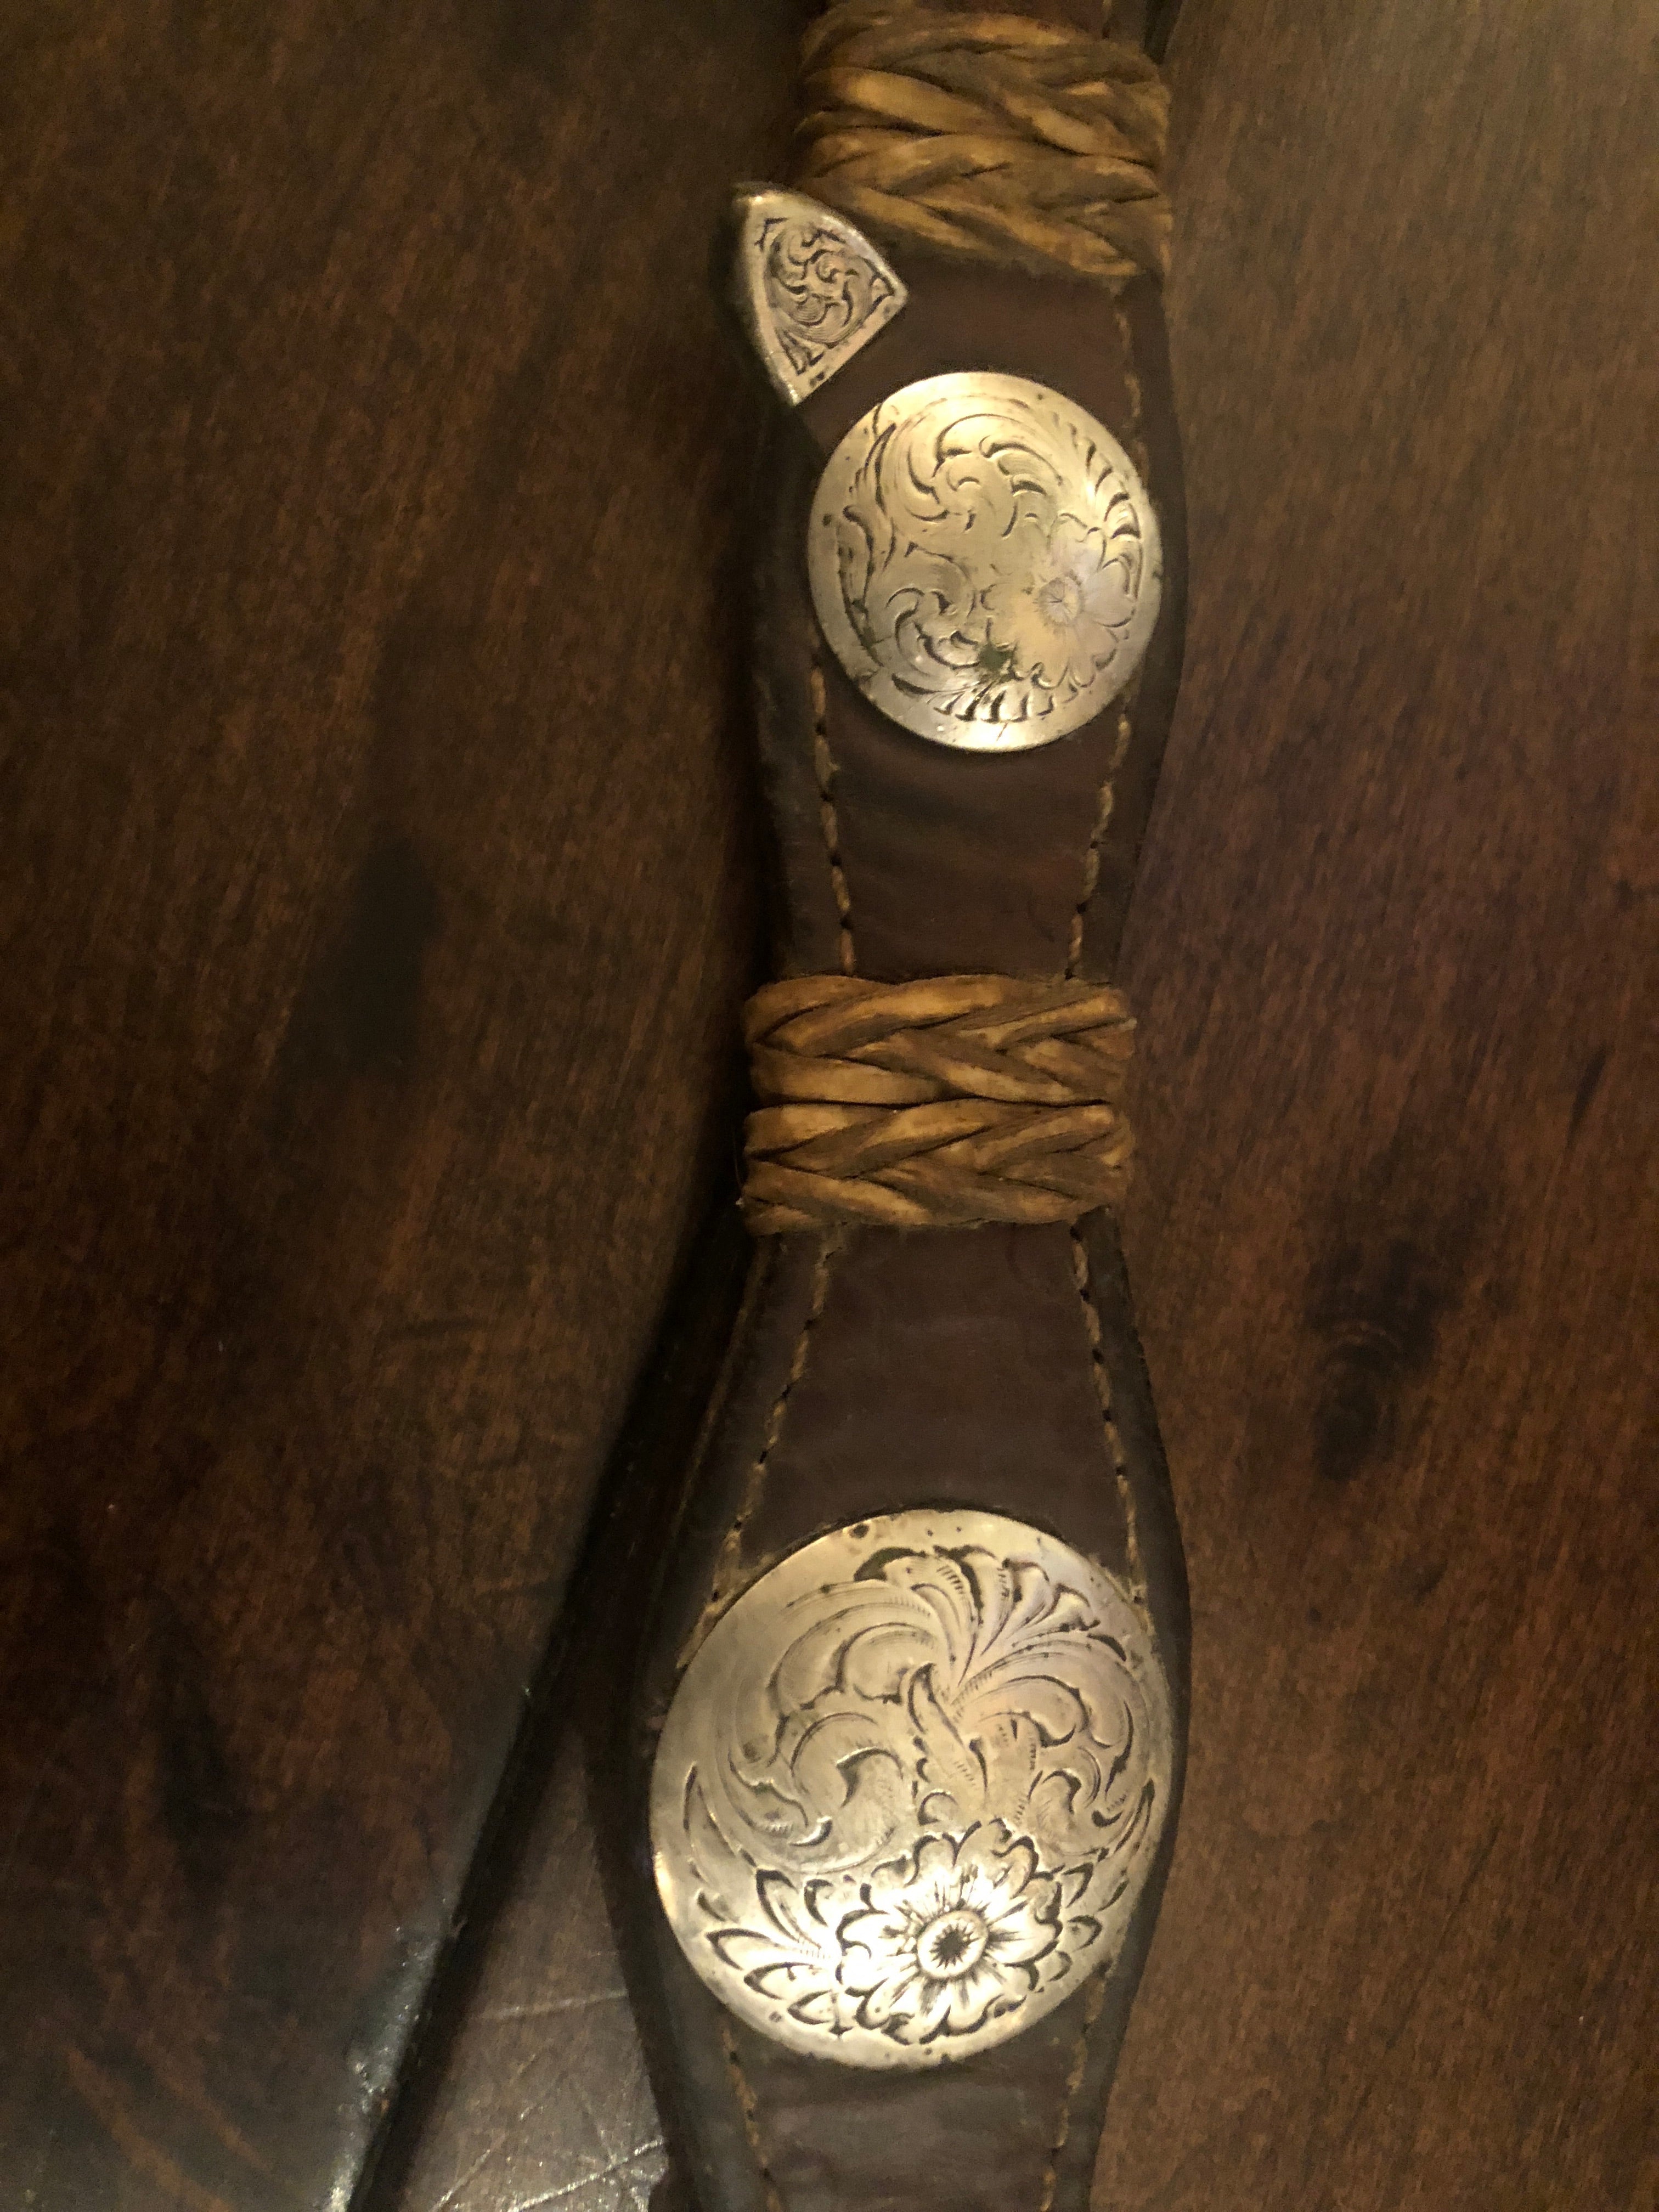 Cowboy Gear Breast Collar w/Silver Concho and Rawhide Accents